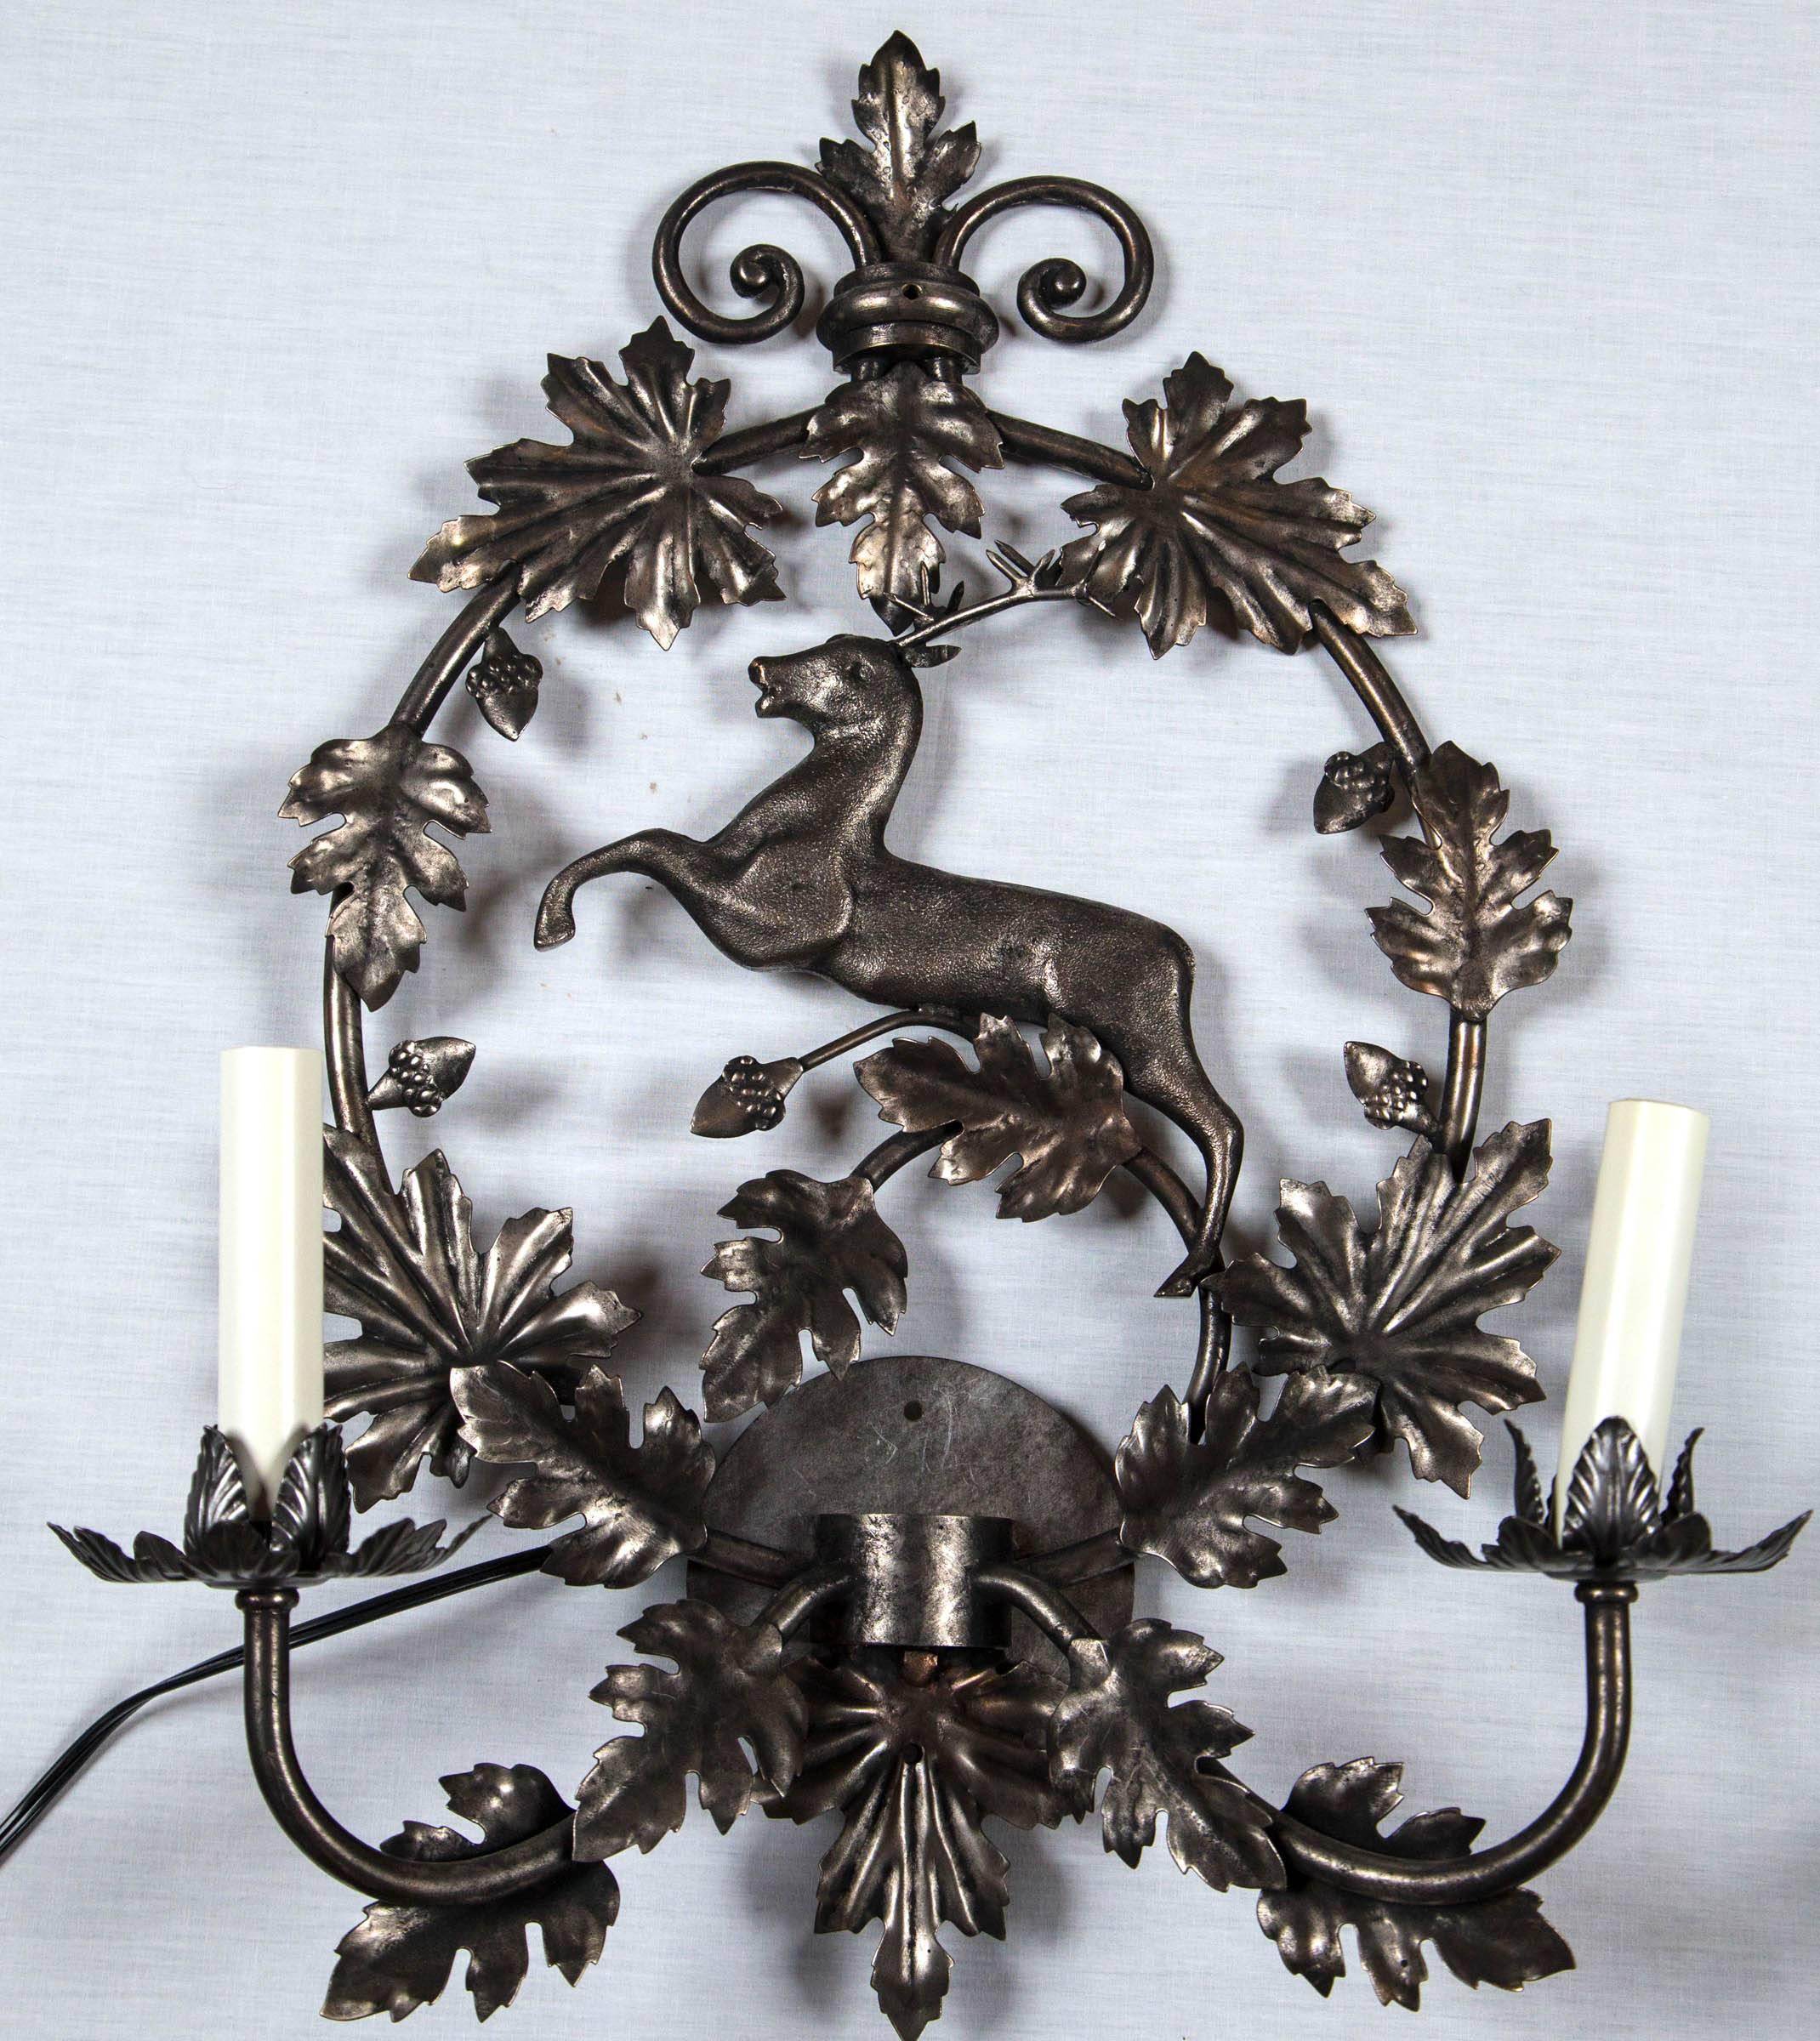 Unknown Pair of New, Old Stock Handcrafted Metal Stag Sconces